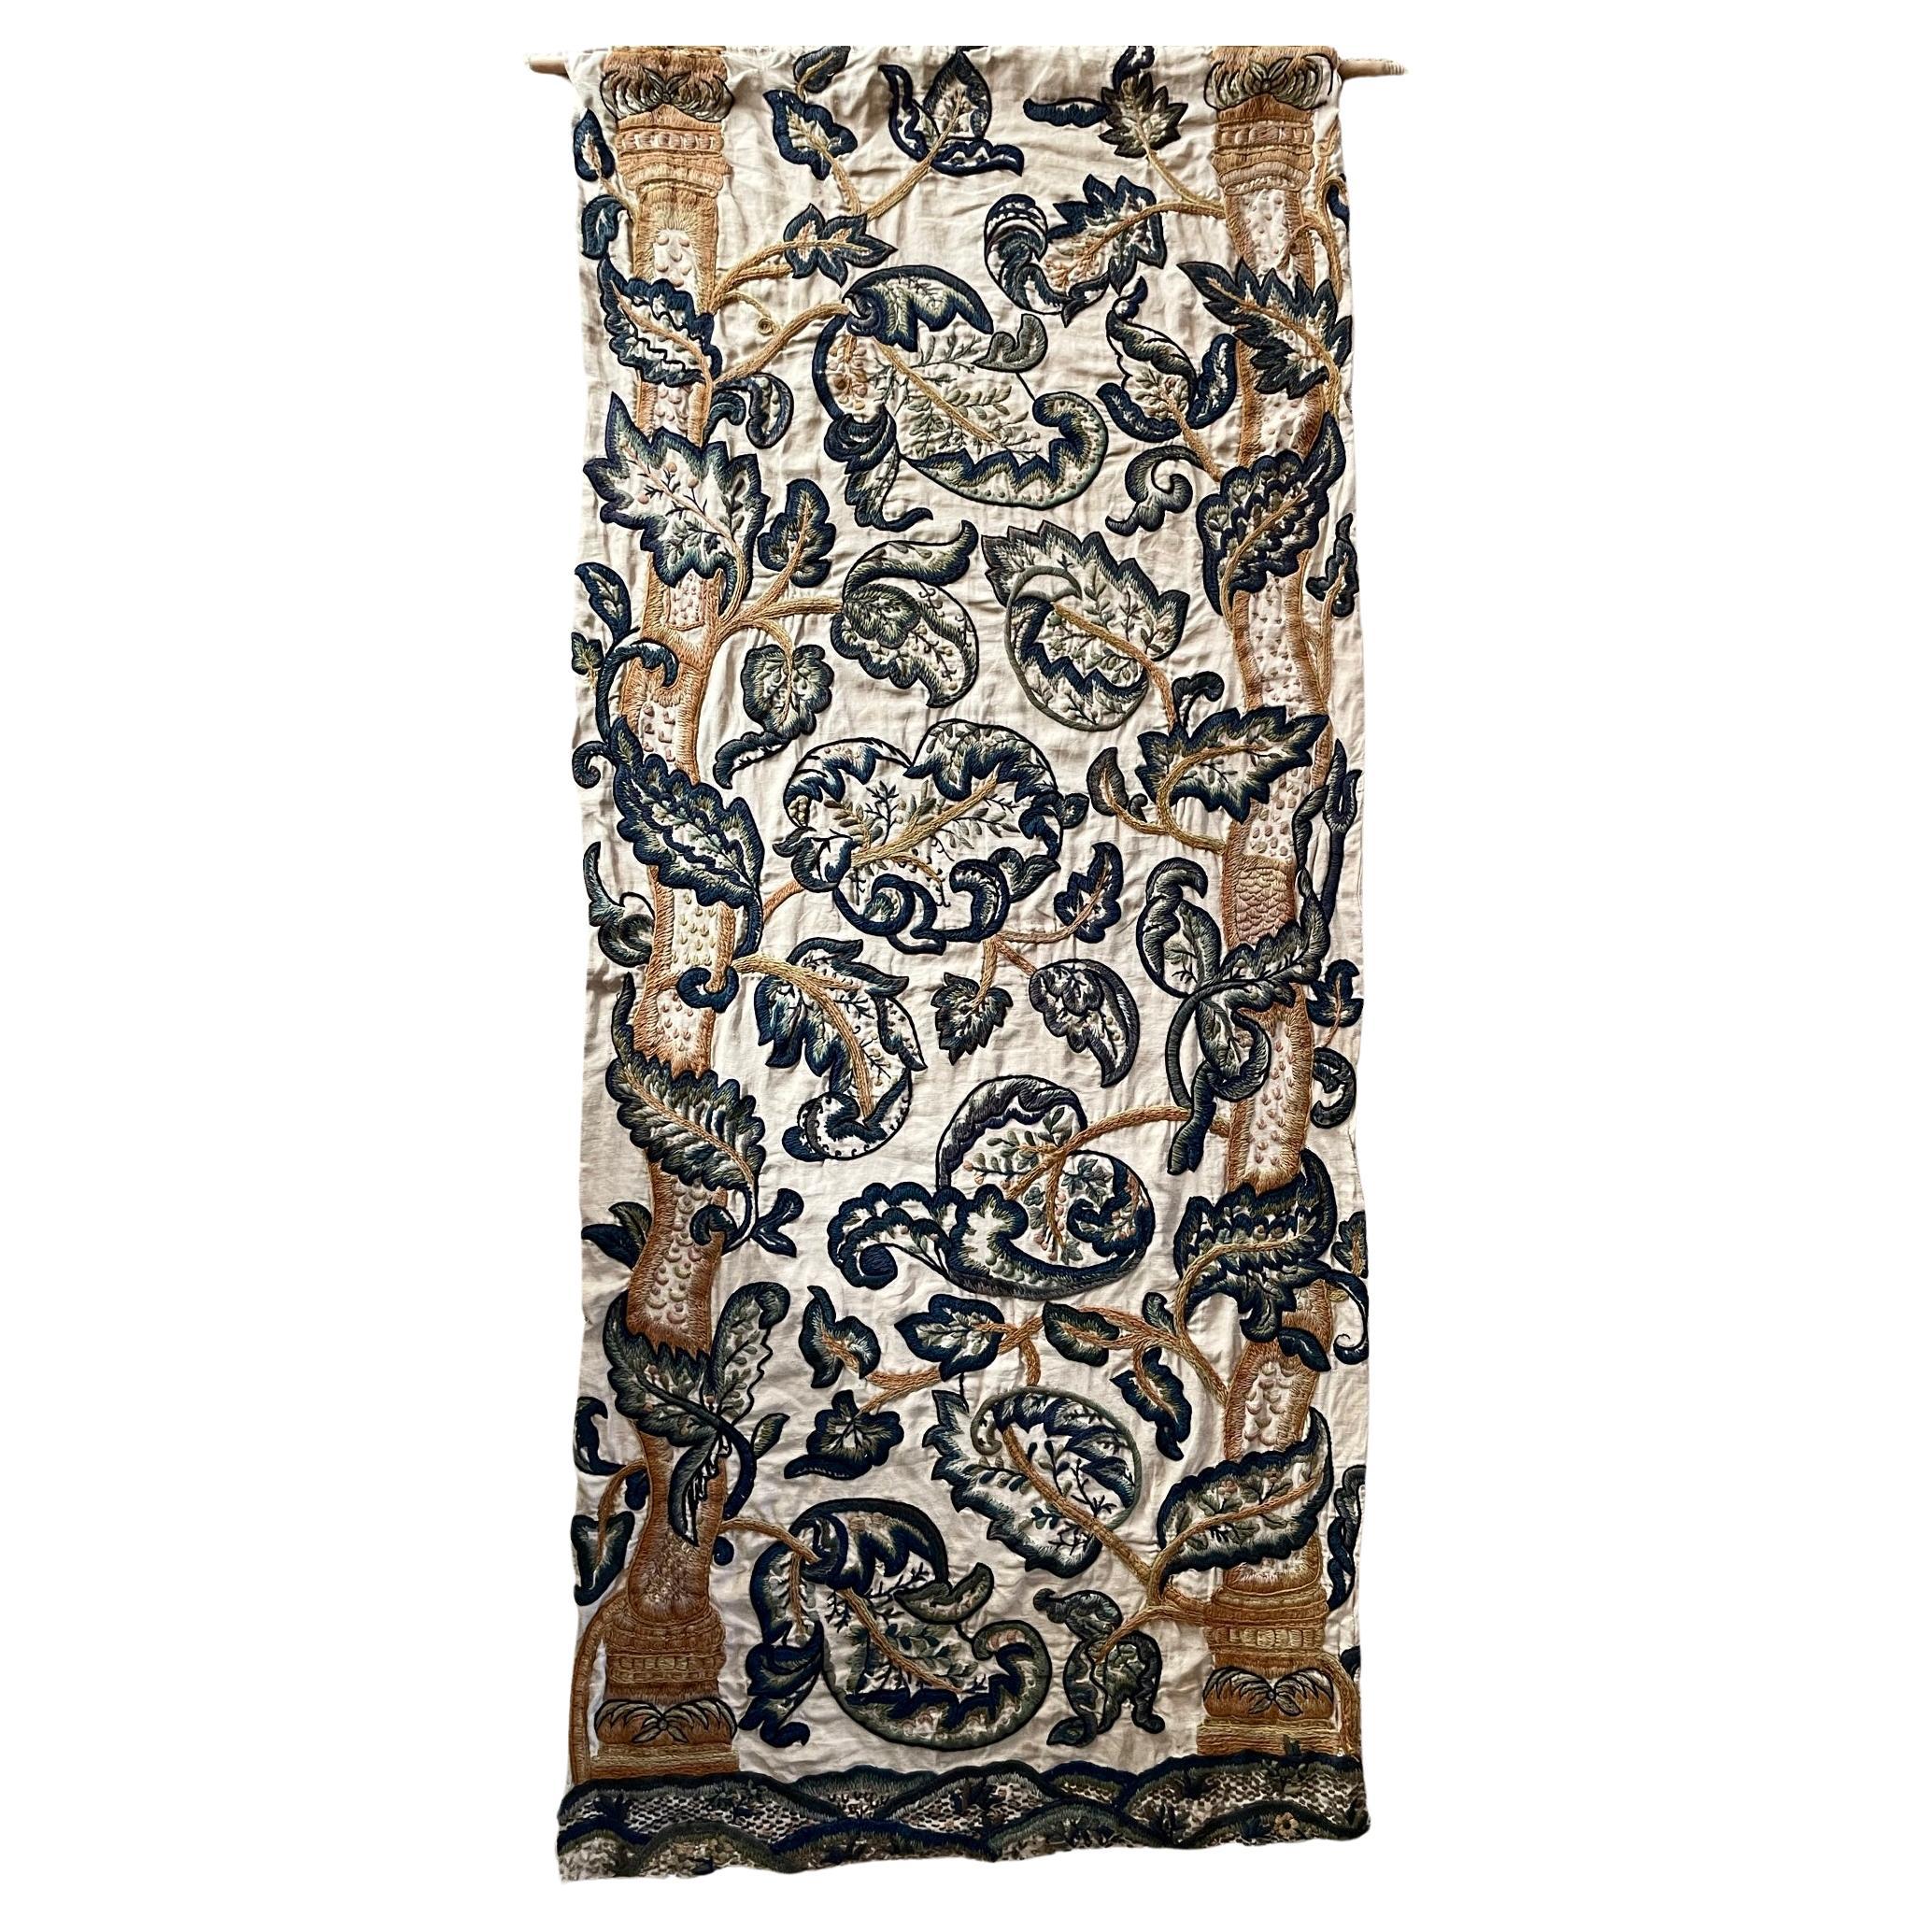 Antique Blue and White and Gold Floral Crewel Work Wall Hanging For Sale